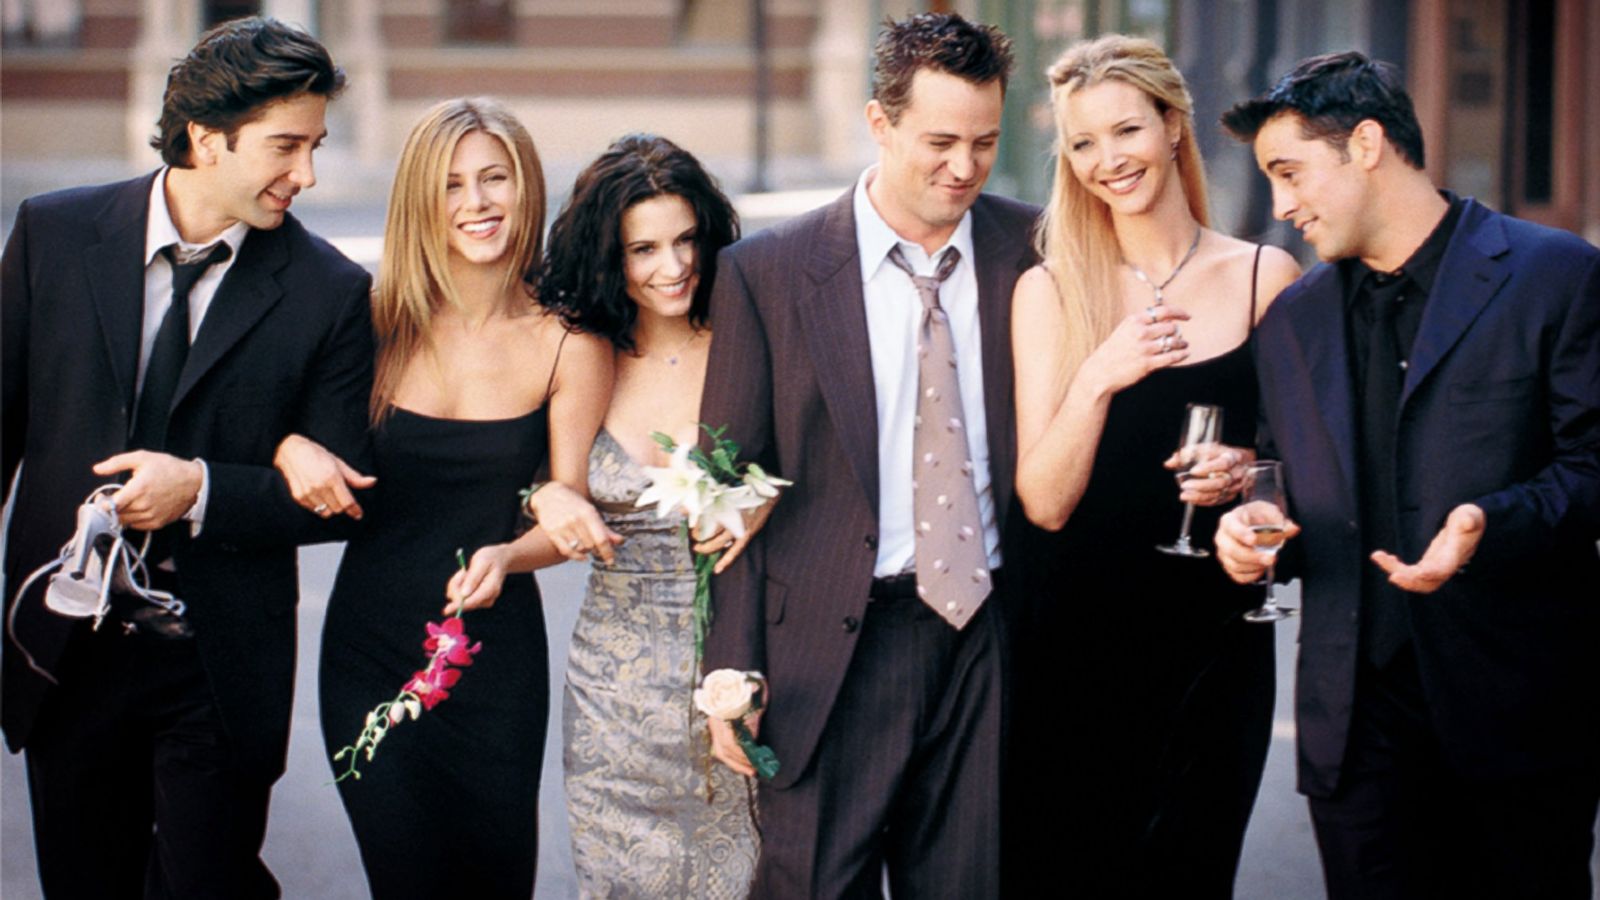 Friends' Turns 20: The 20 Most Memorable Quotes From the Series